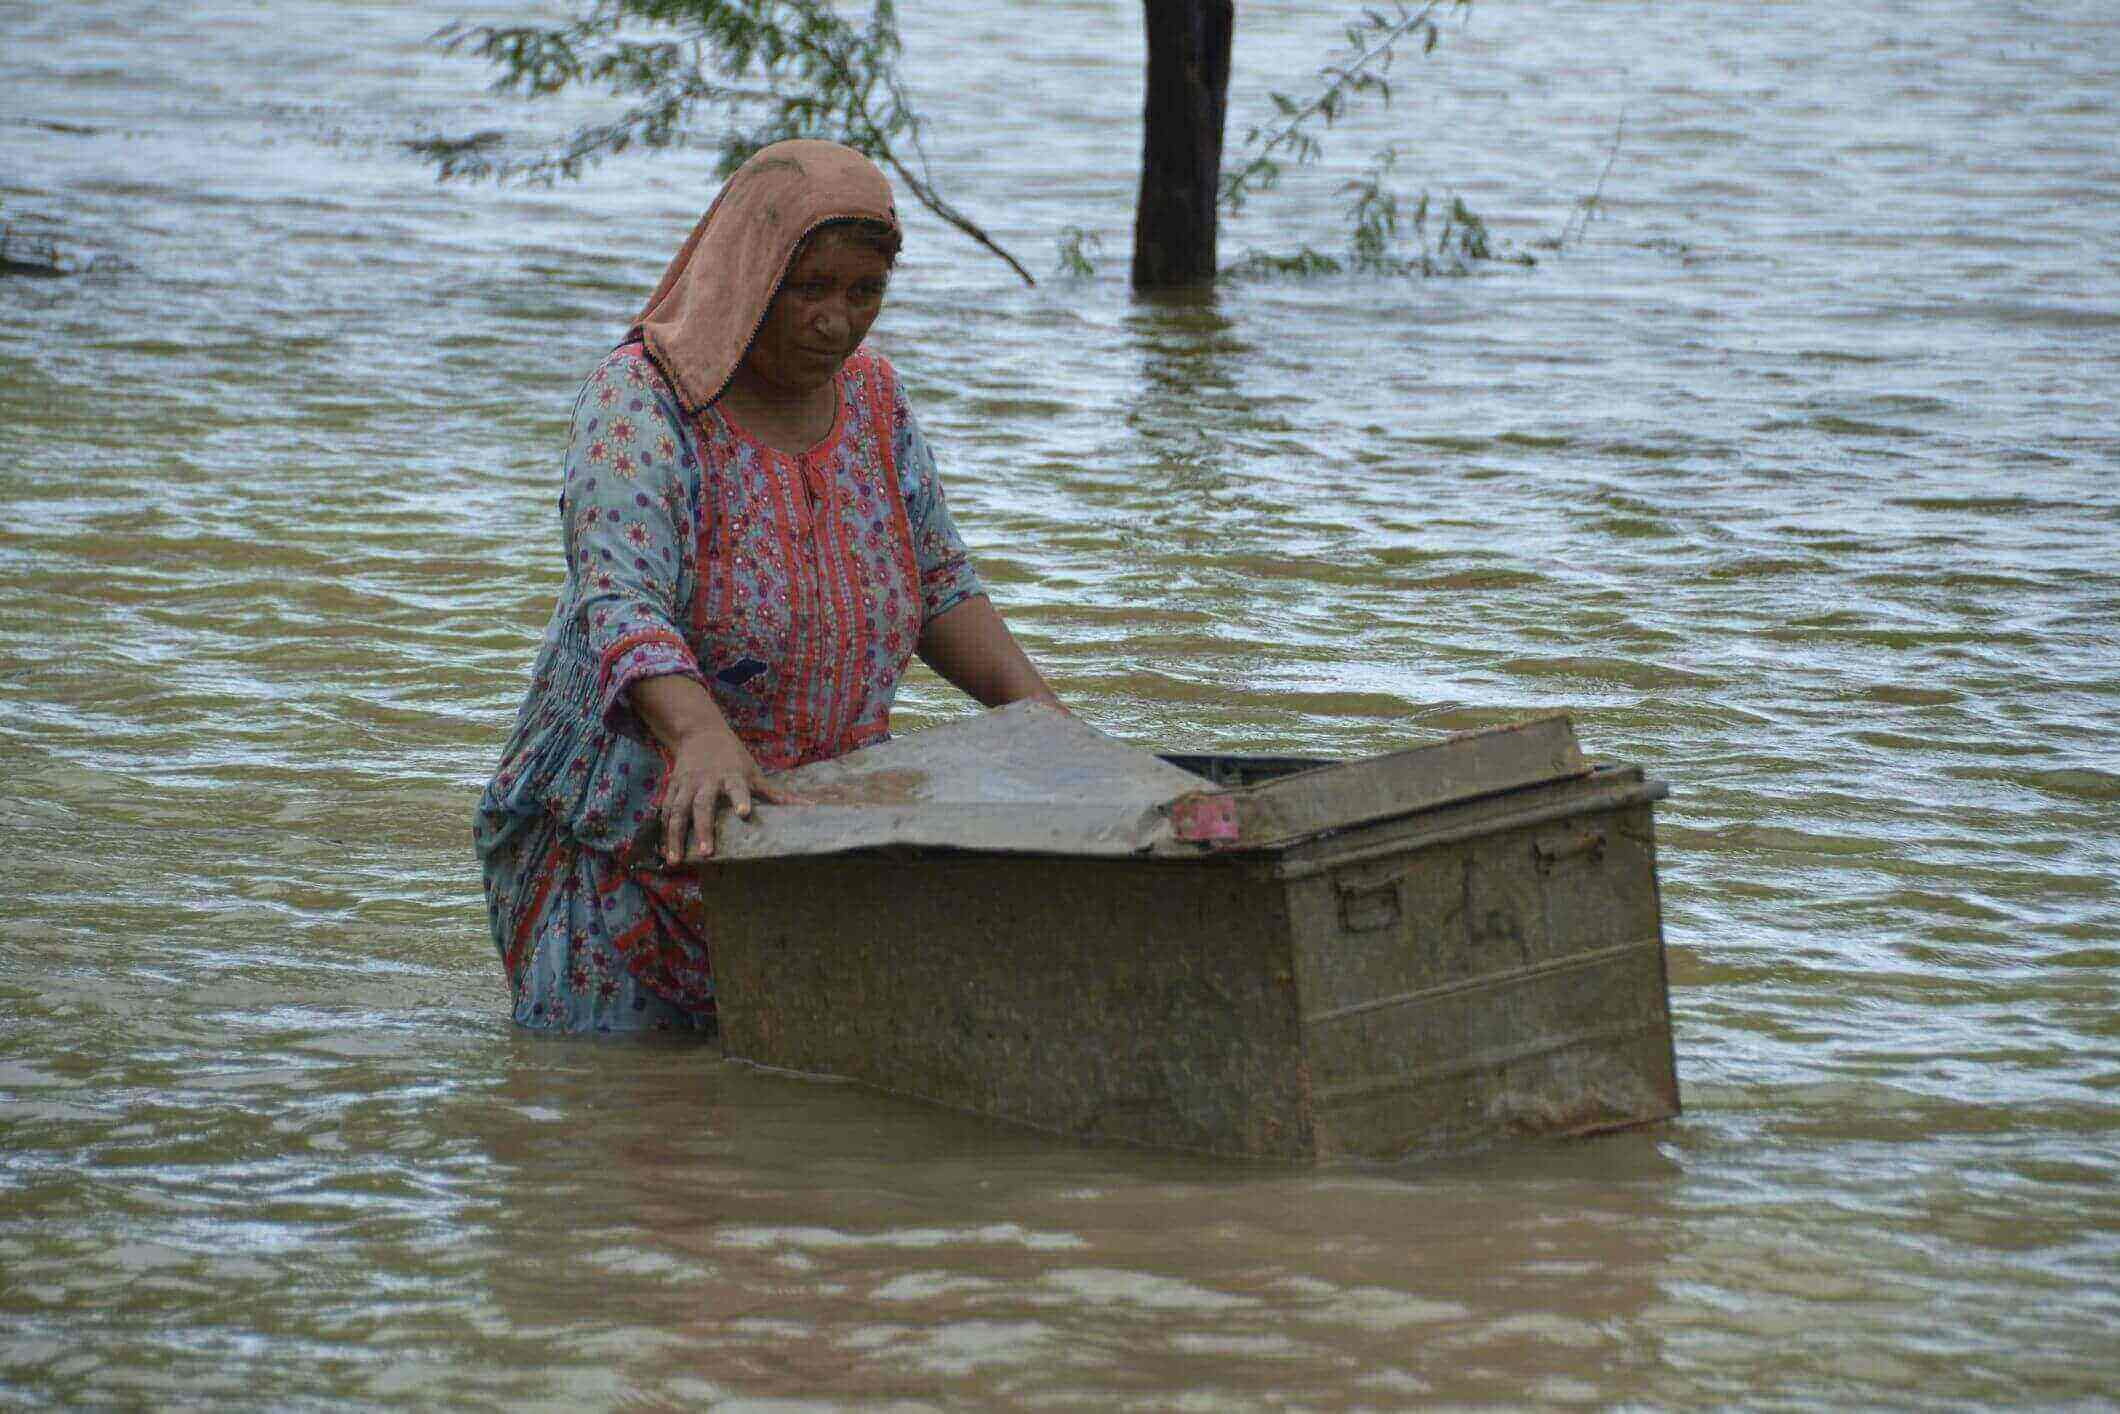 Islamic Development Bank Group Willing To Help Pakistan After Floods